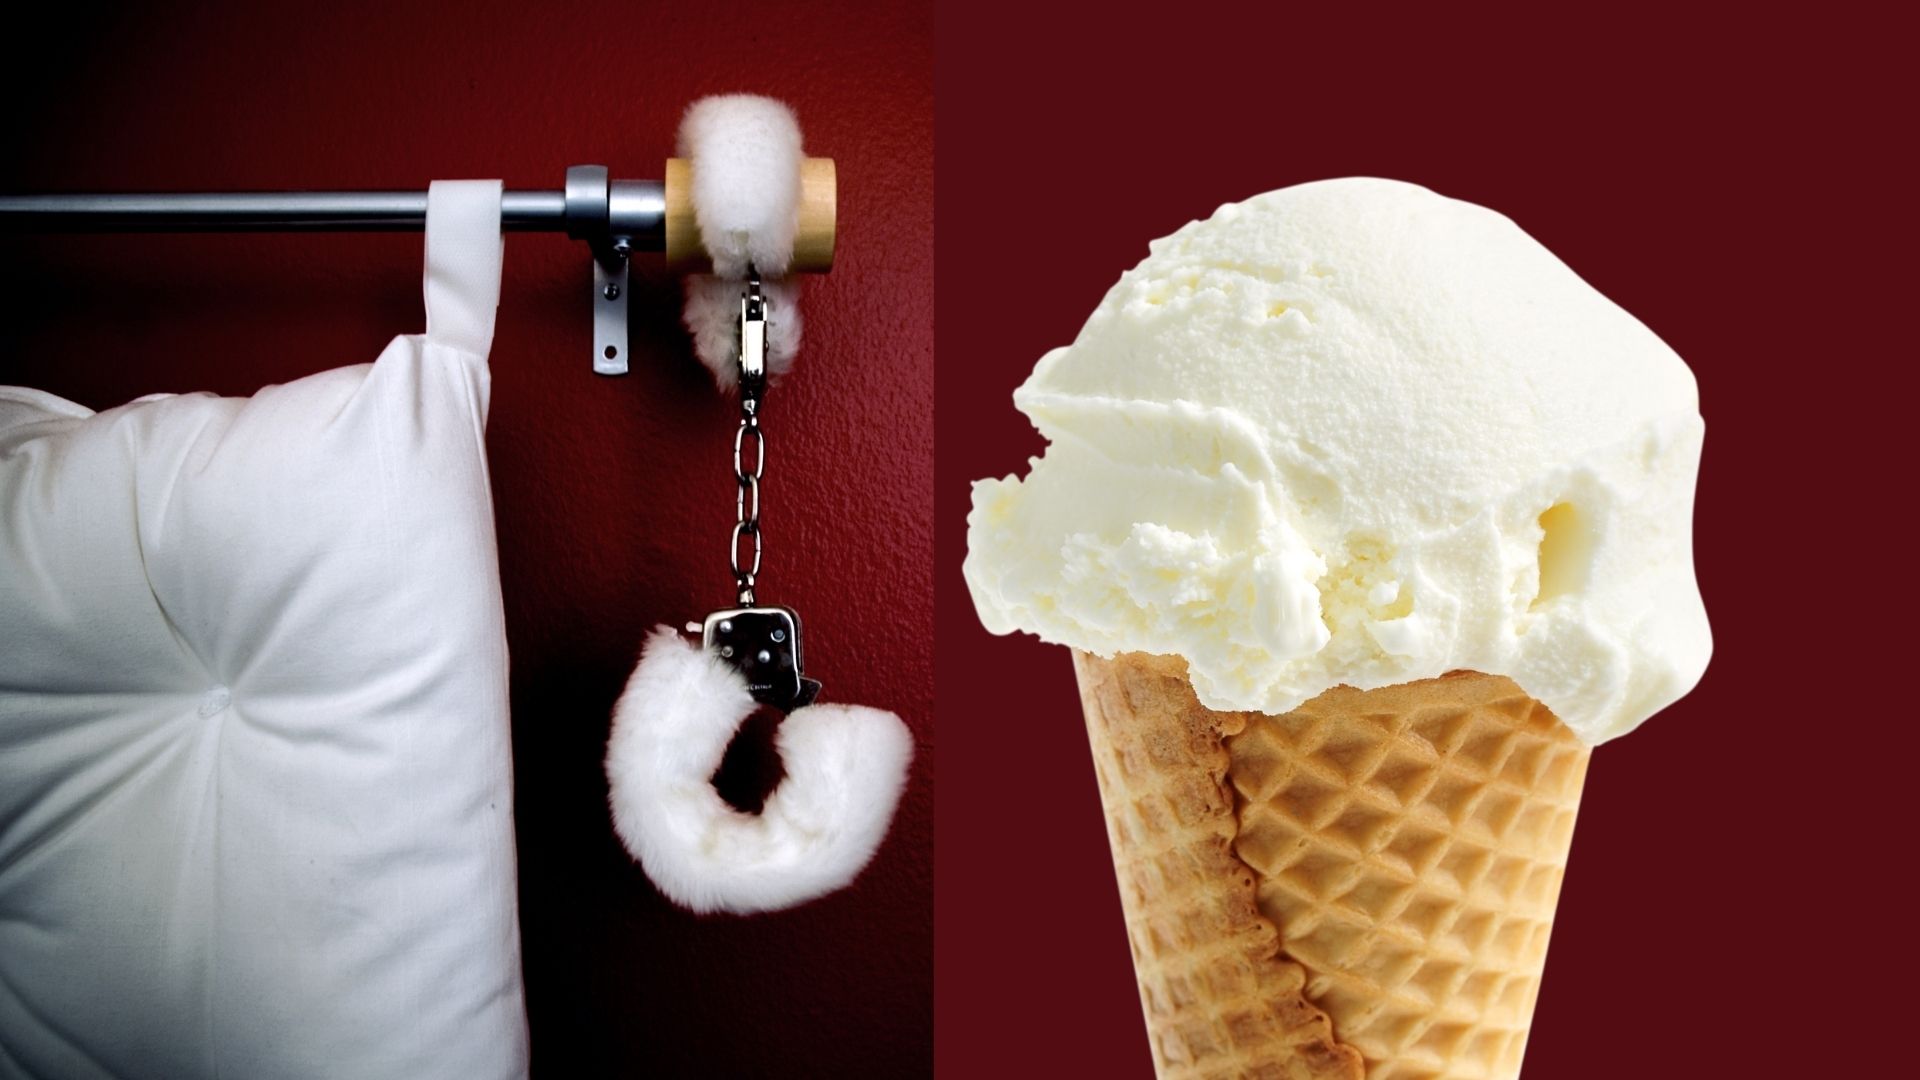 Different Sexual Tests - a bed with handcuffs and a vanilla ice-cream